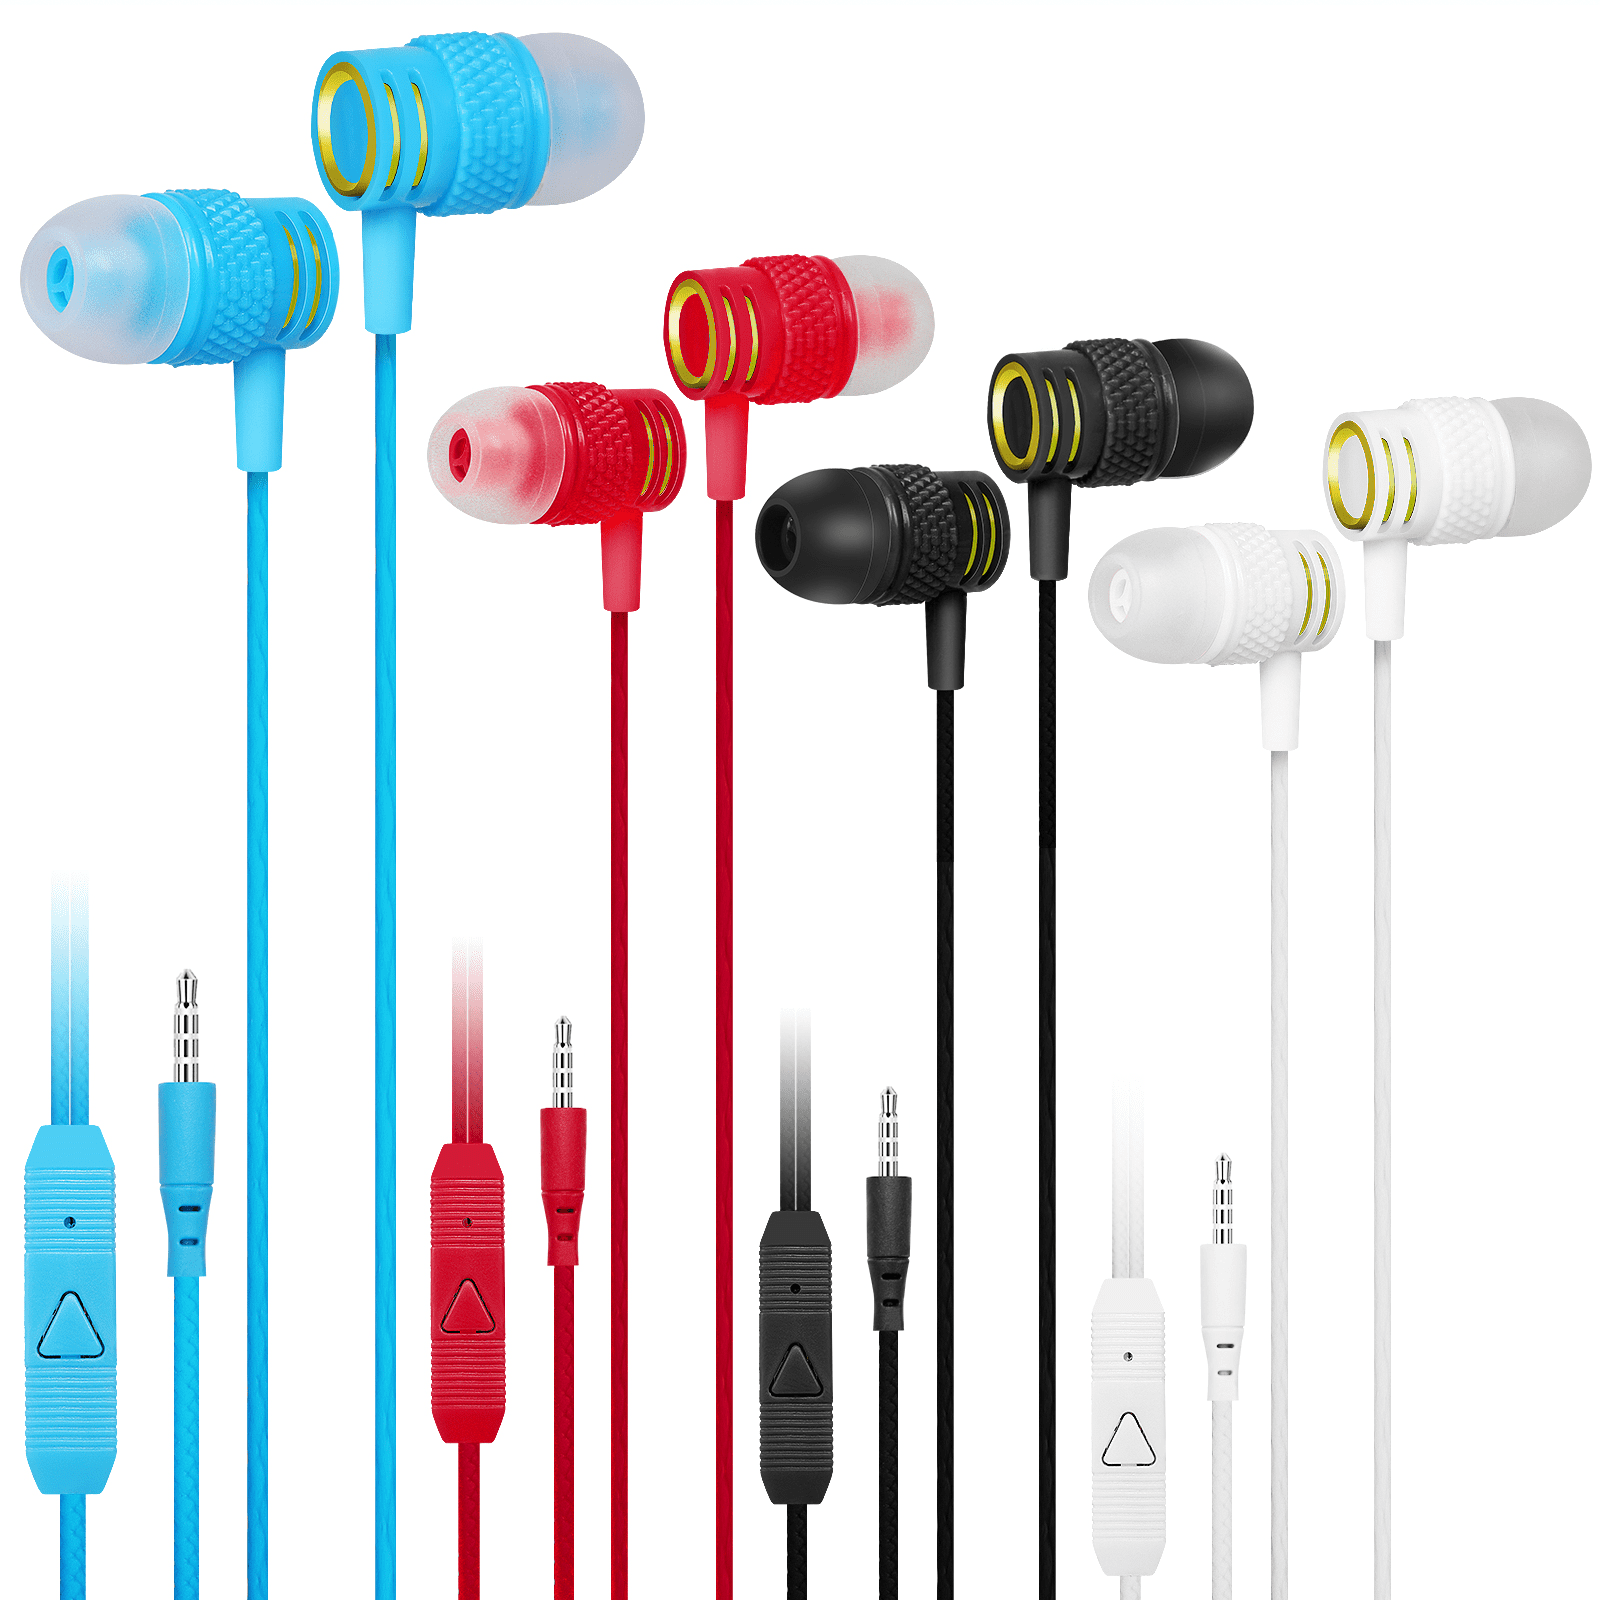 Earbud Tips for MOTOROLA MOTO Surround Stream Earbuds Noise Isolation Tips 